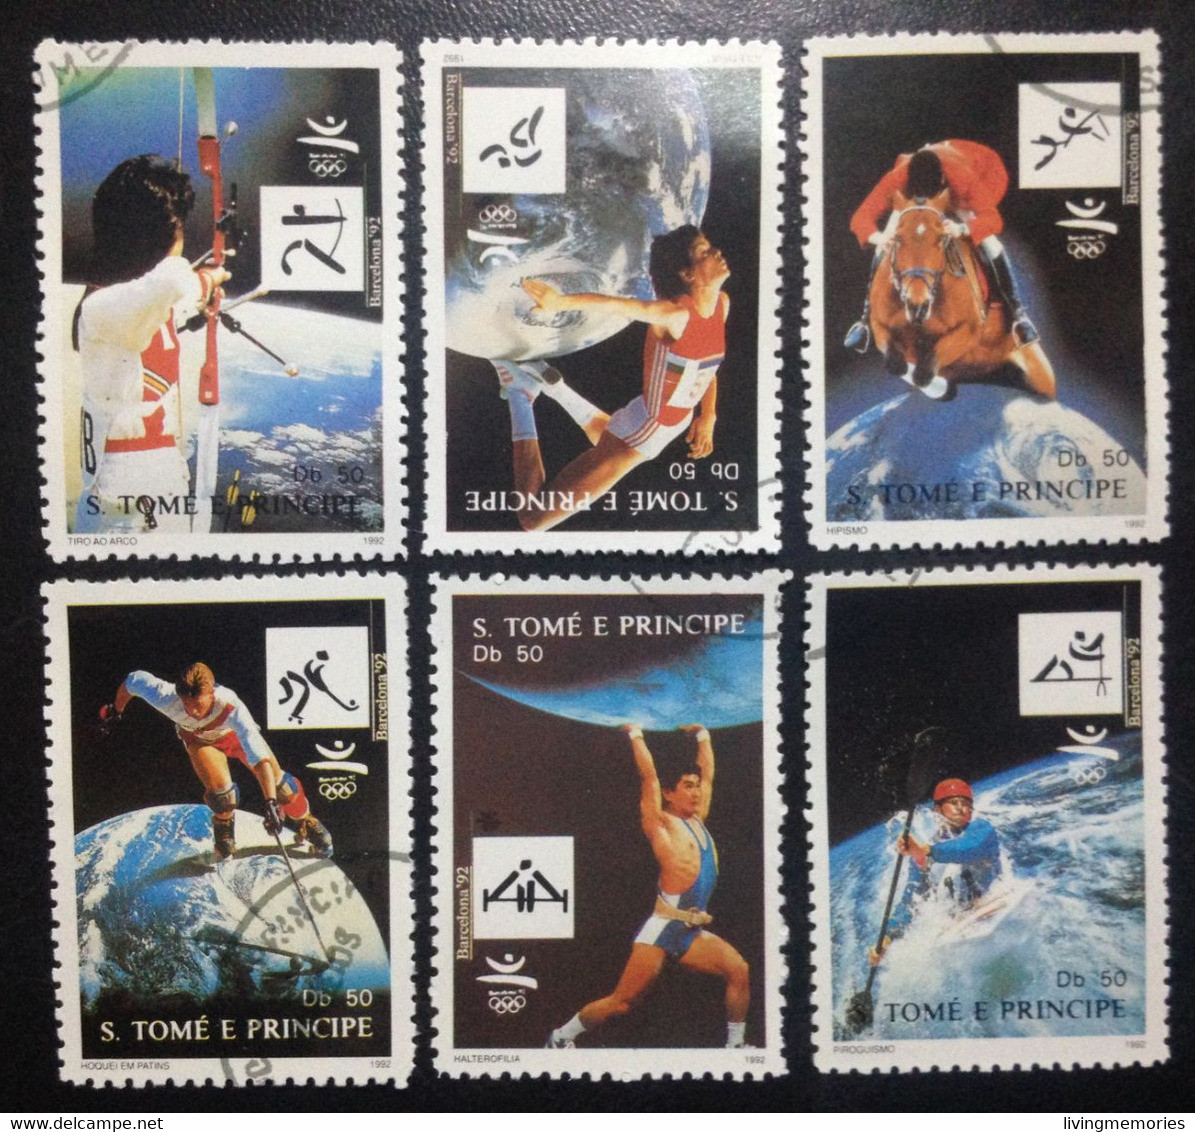 L2P5, Sao Tome And Principe, Stamps CTO, « OLYMPIC GAMES », 1992 - Summer 1992: Barcelona